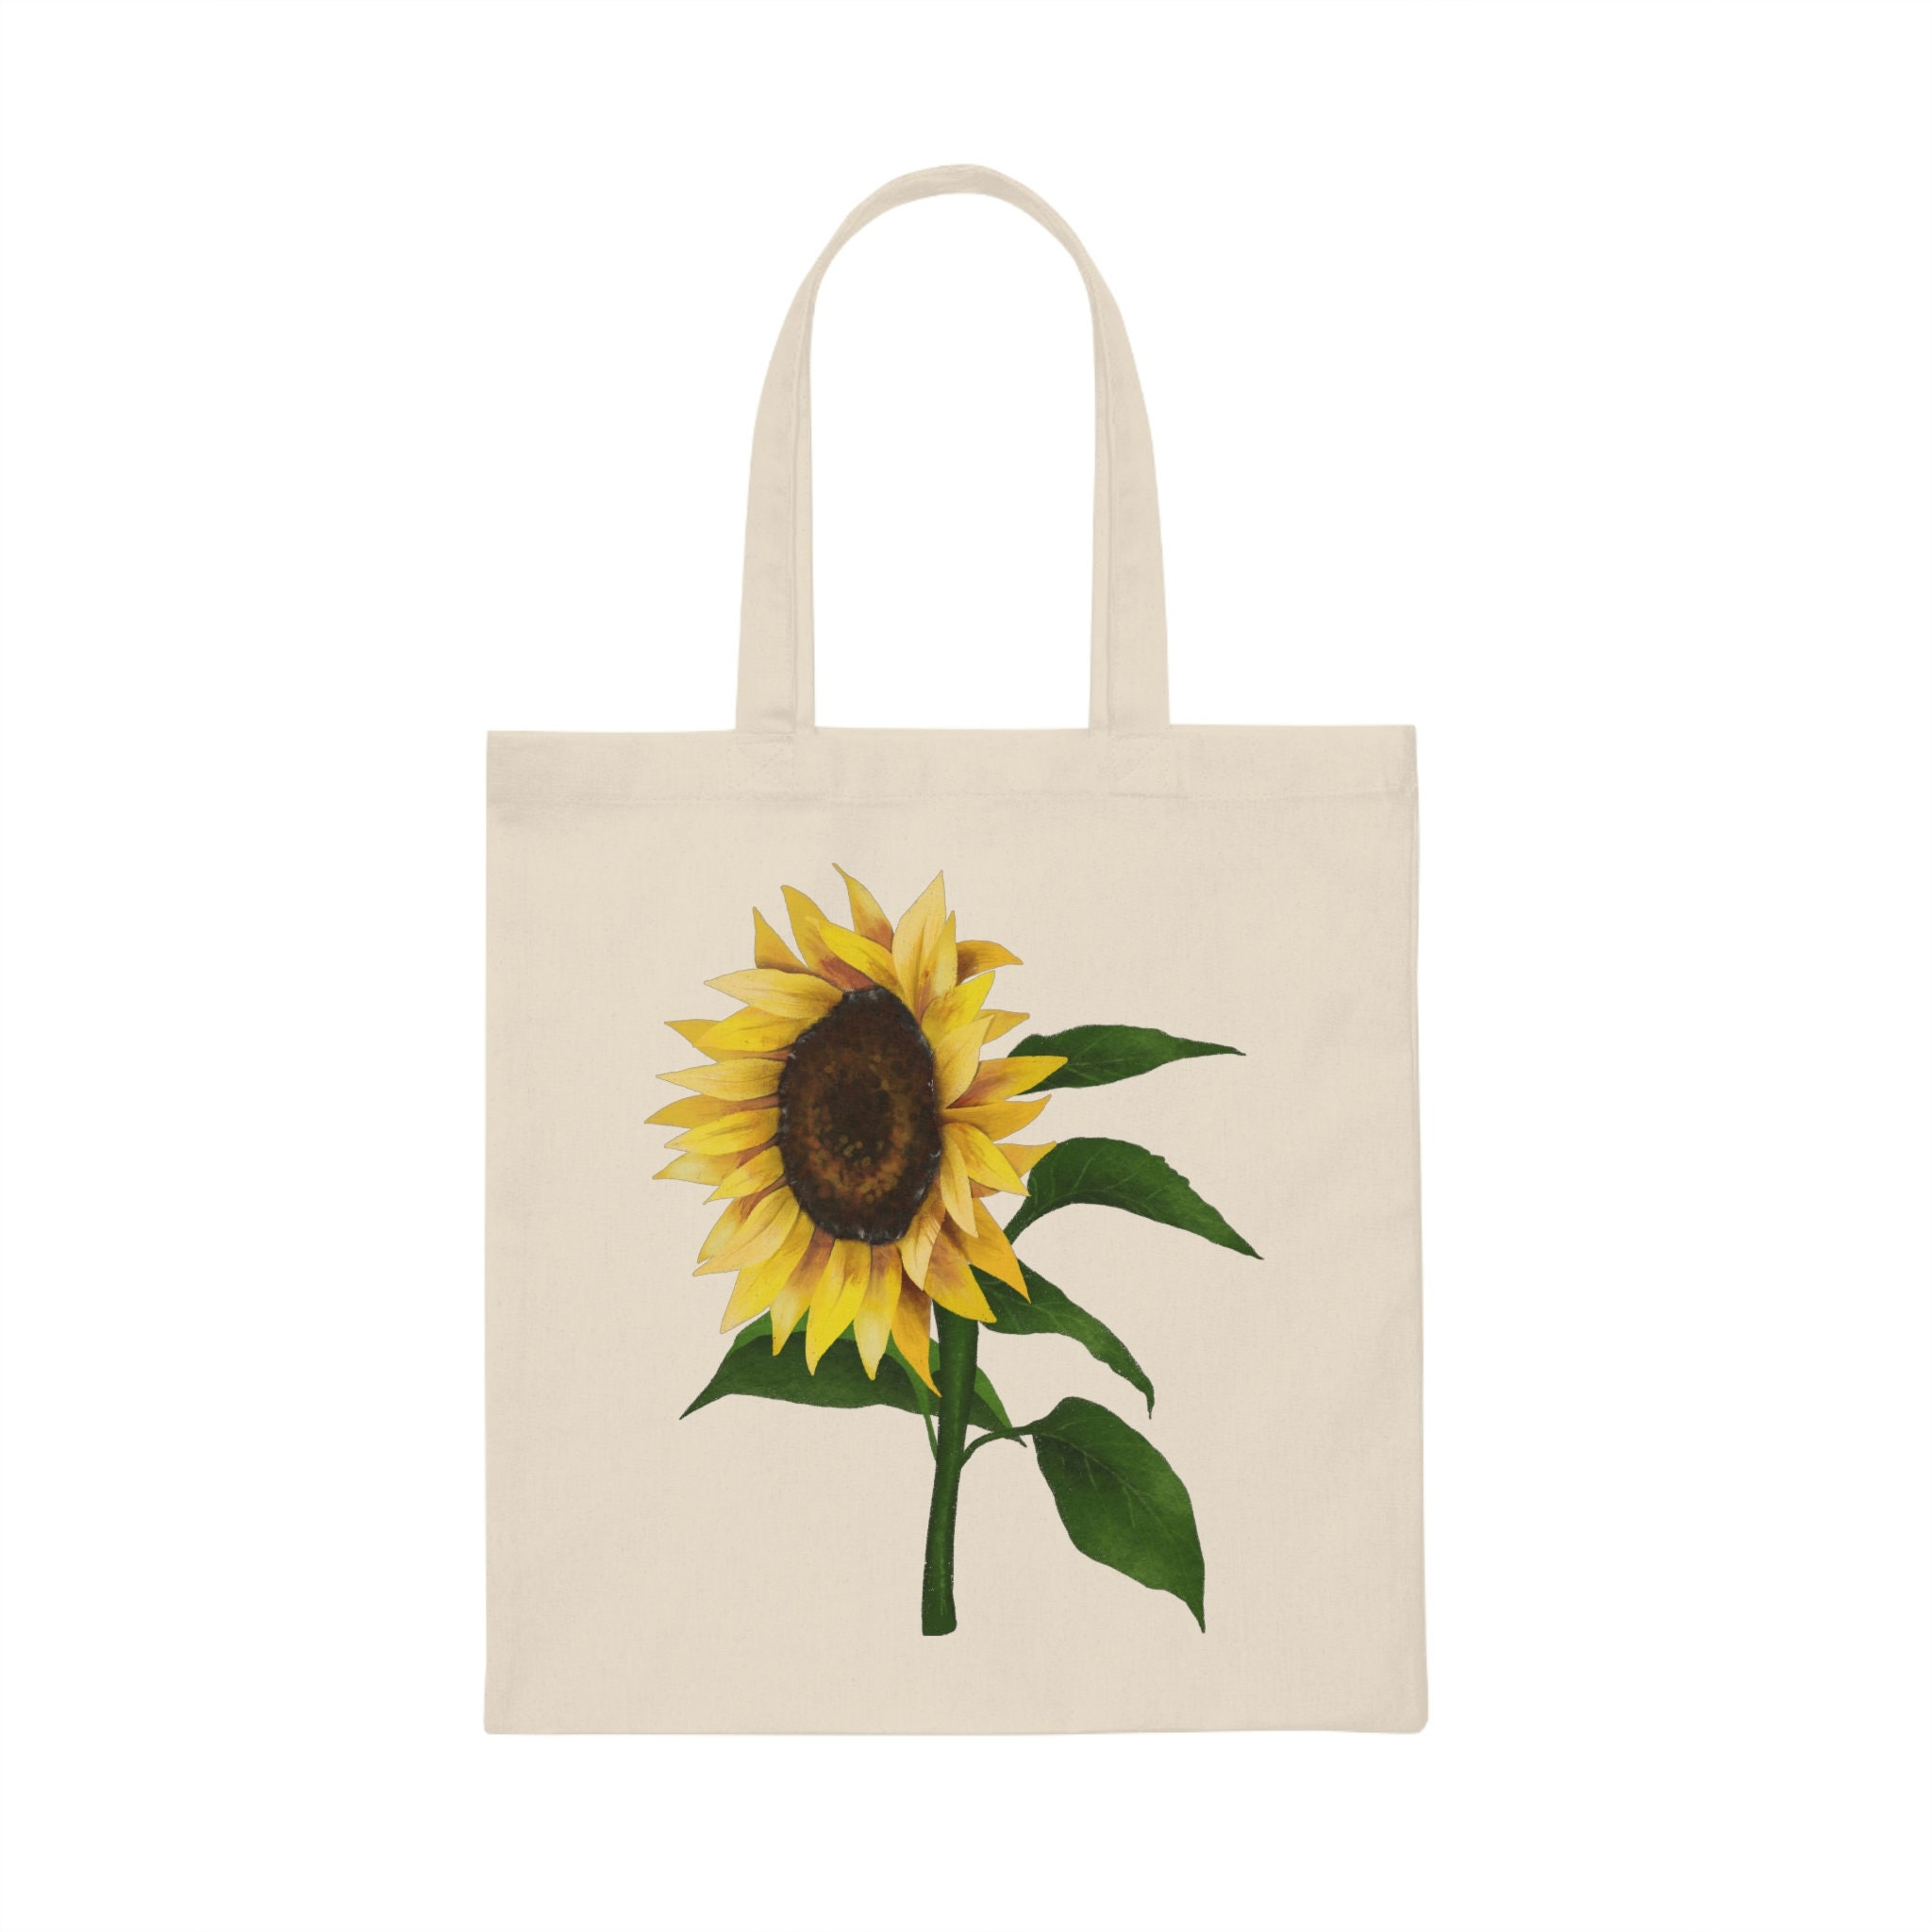 Sunflower on Wood Beach Tote with Rope Handles, Tote Bag, Beach Bag,  Reusable Grocery Tote, Farmers Market Bag